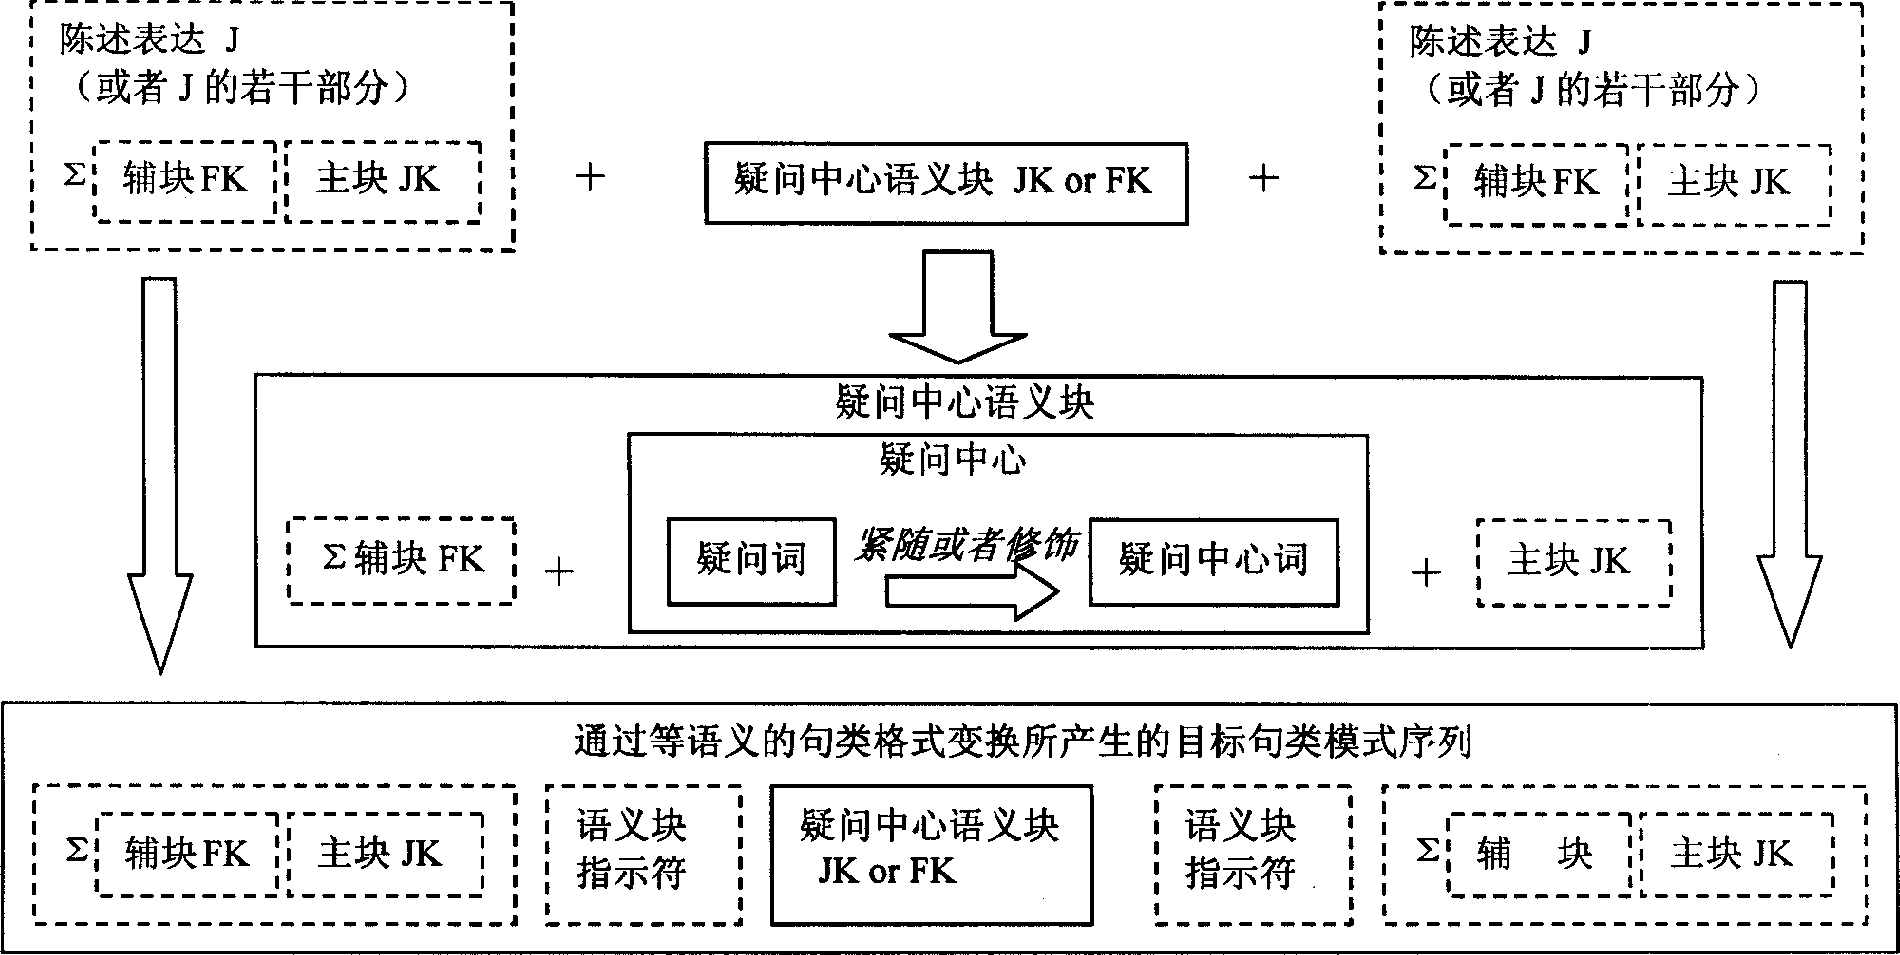 Computer information retrieval system based on natural speech understanding and its searching method